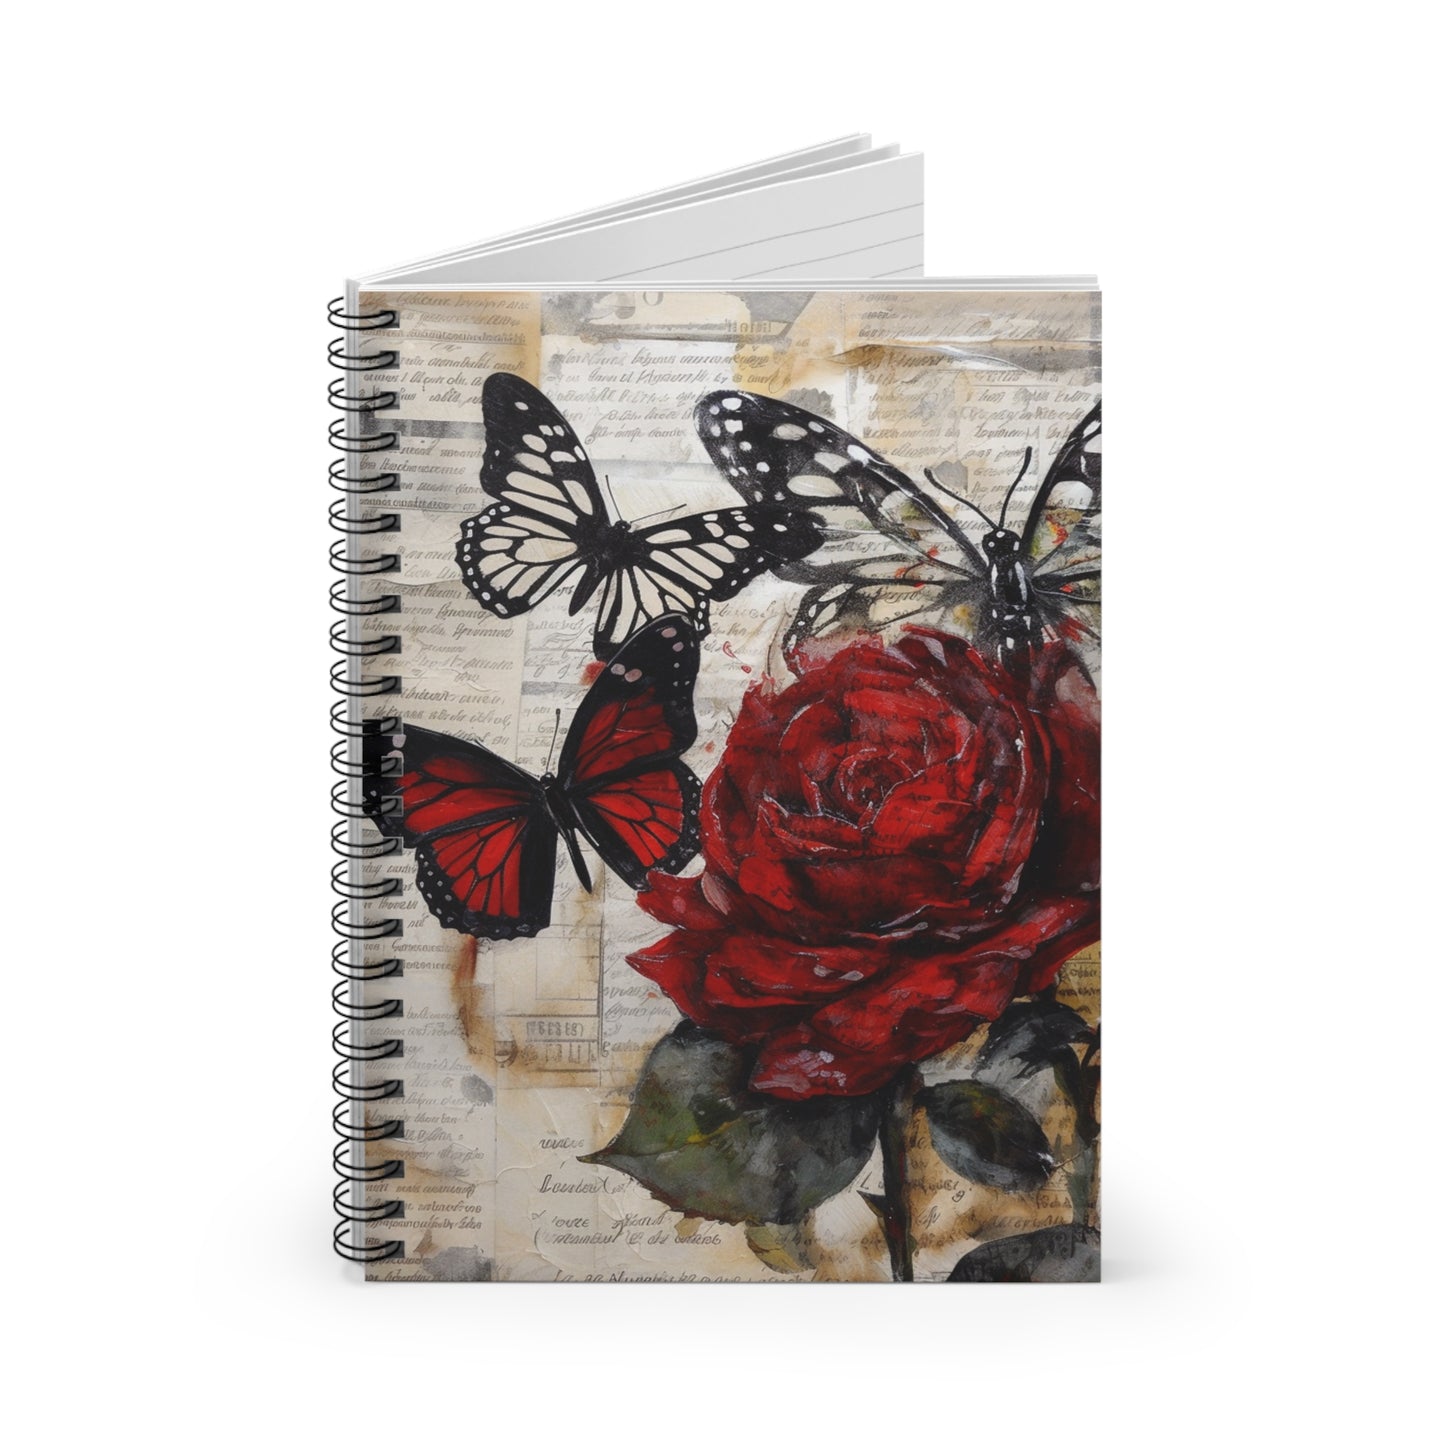 Spiral notebook - Ruled Line - Butterflies and a red rose